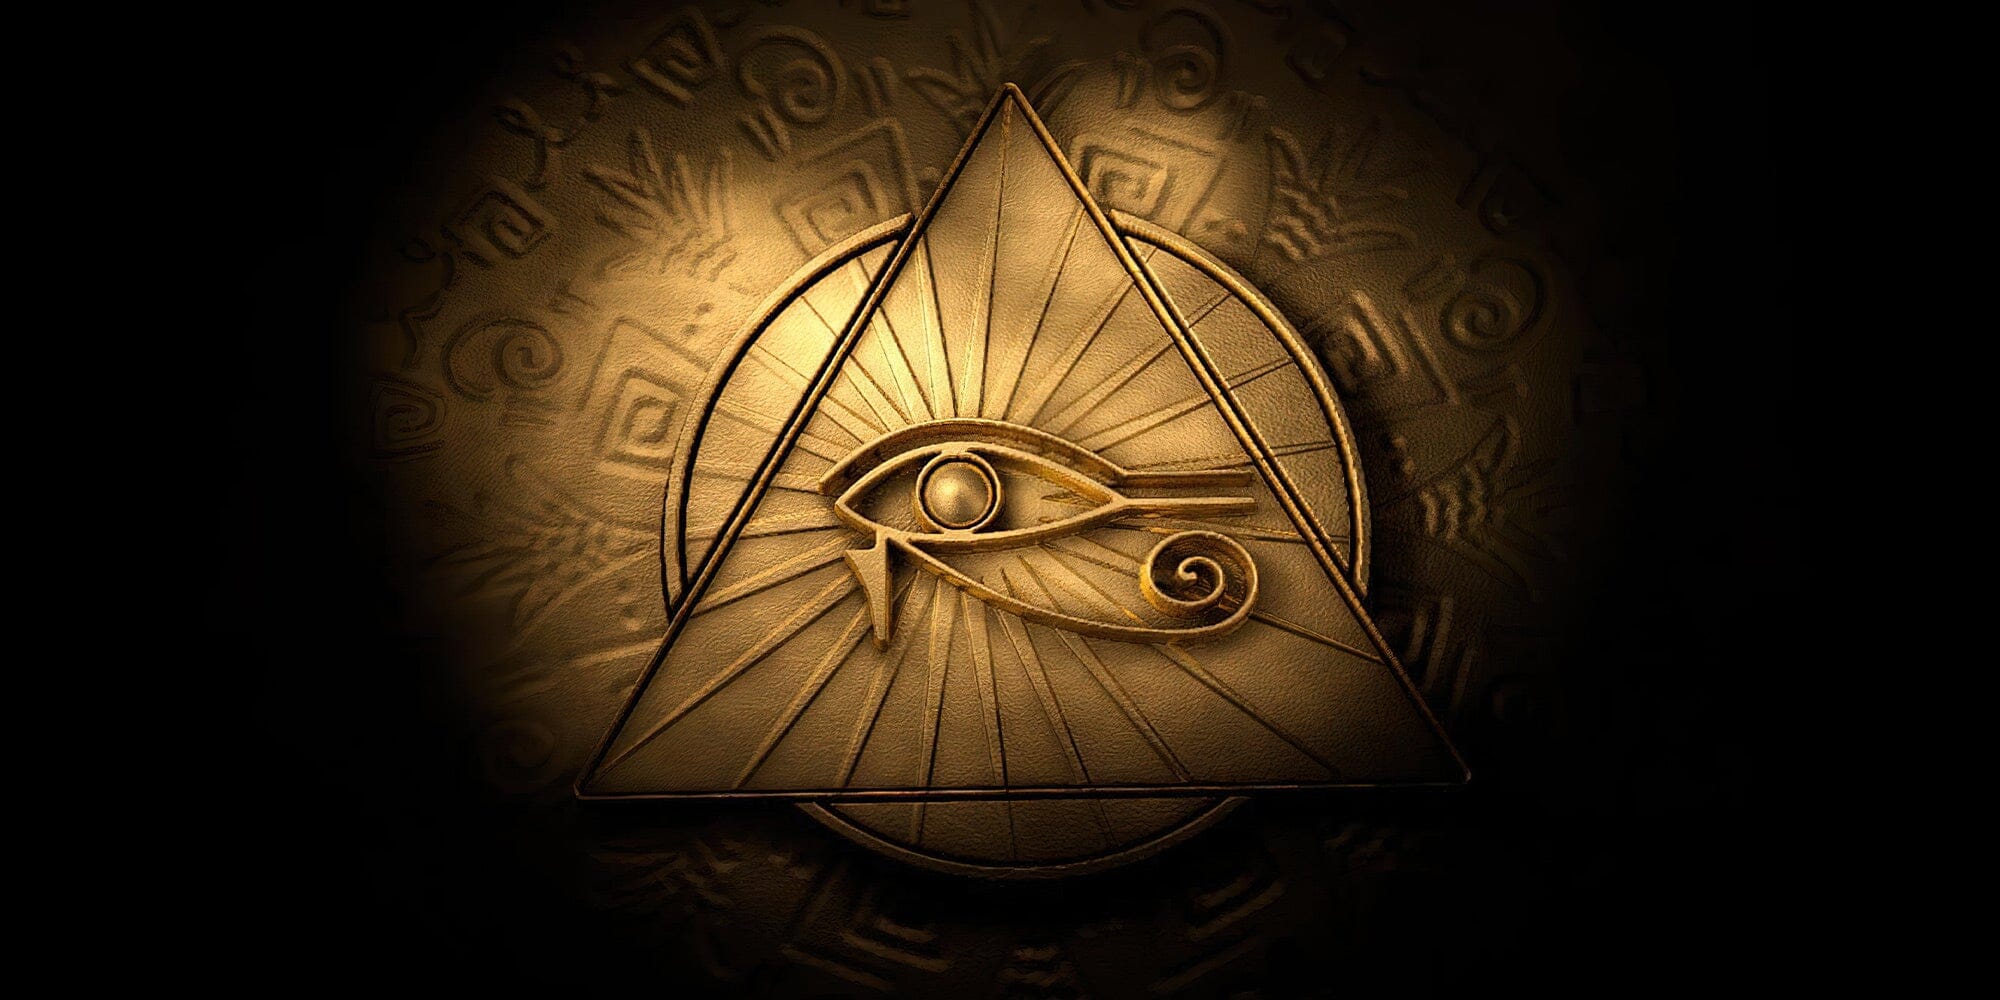 The Eye of Horus, the Omnipresent Guardian Power